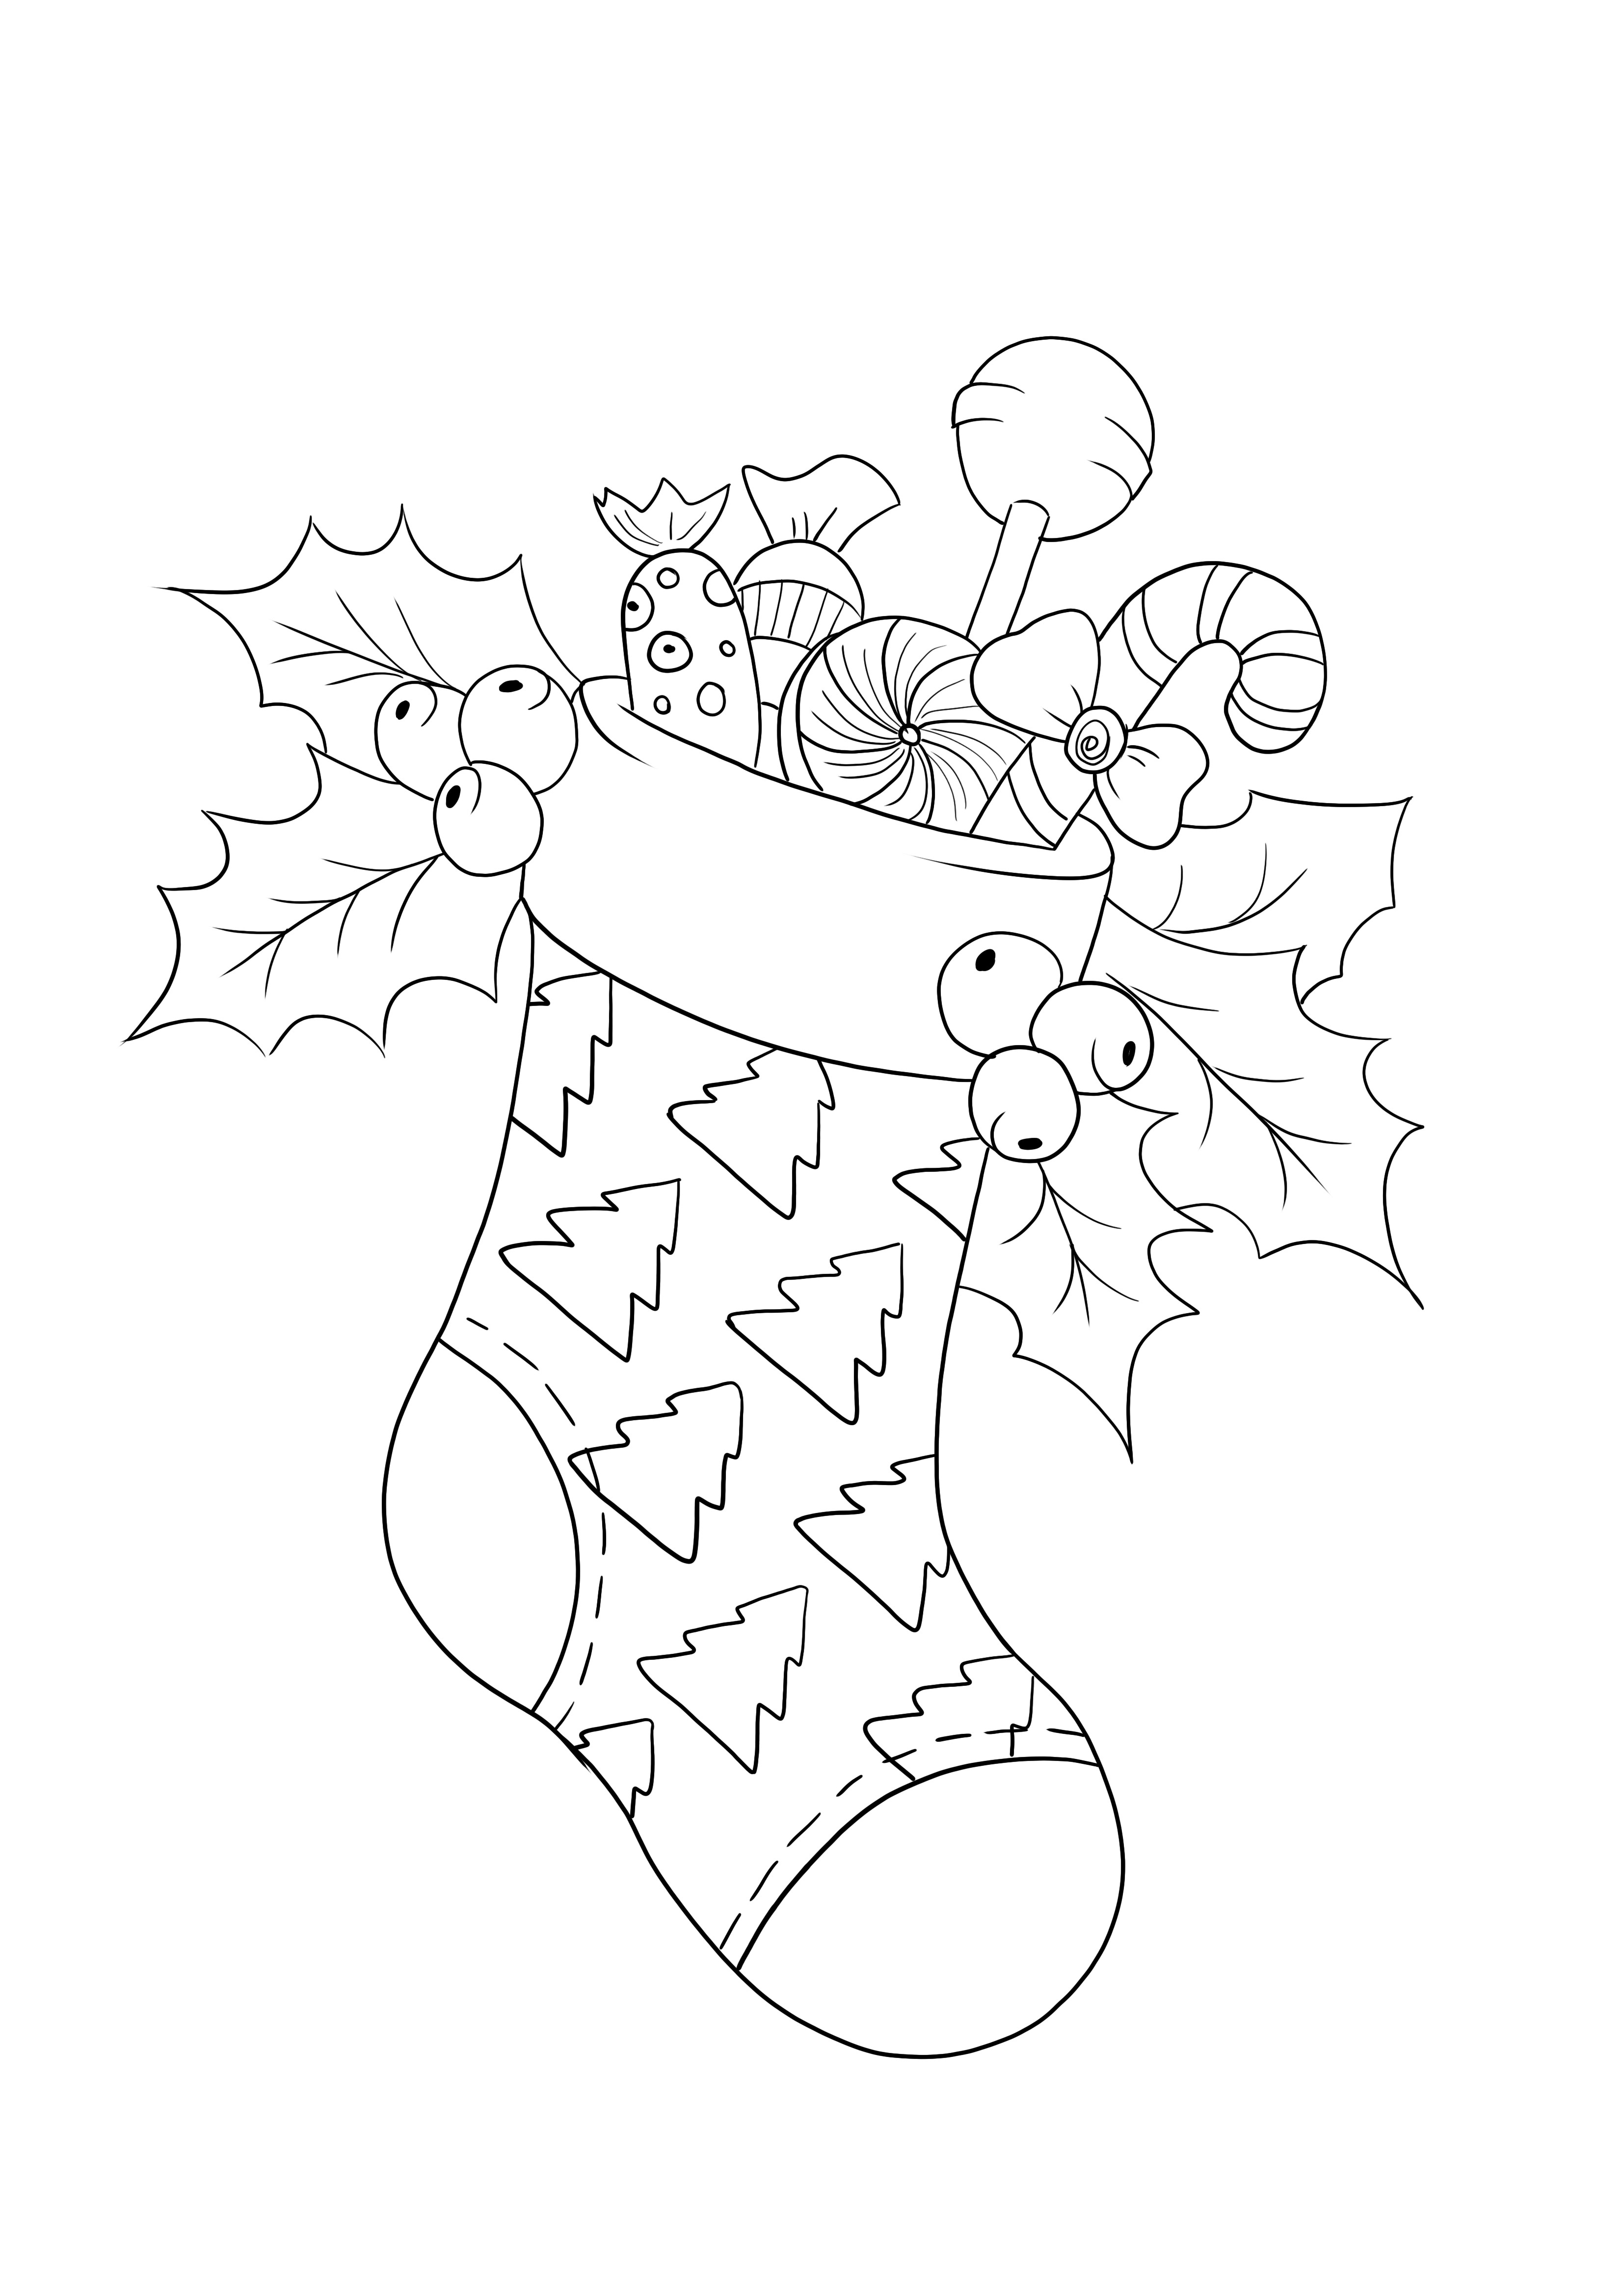 Christmas stockings and presents free to download picture